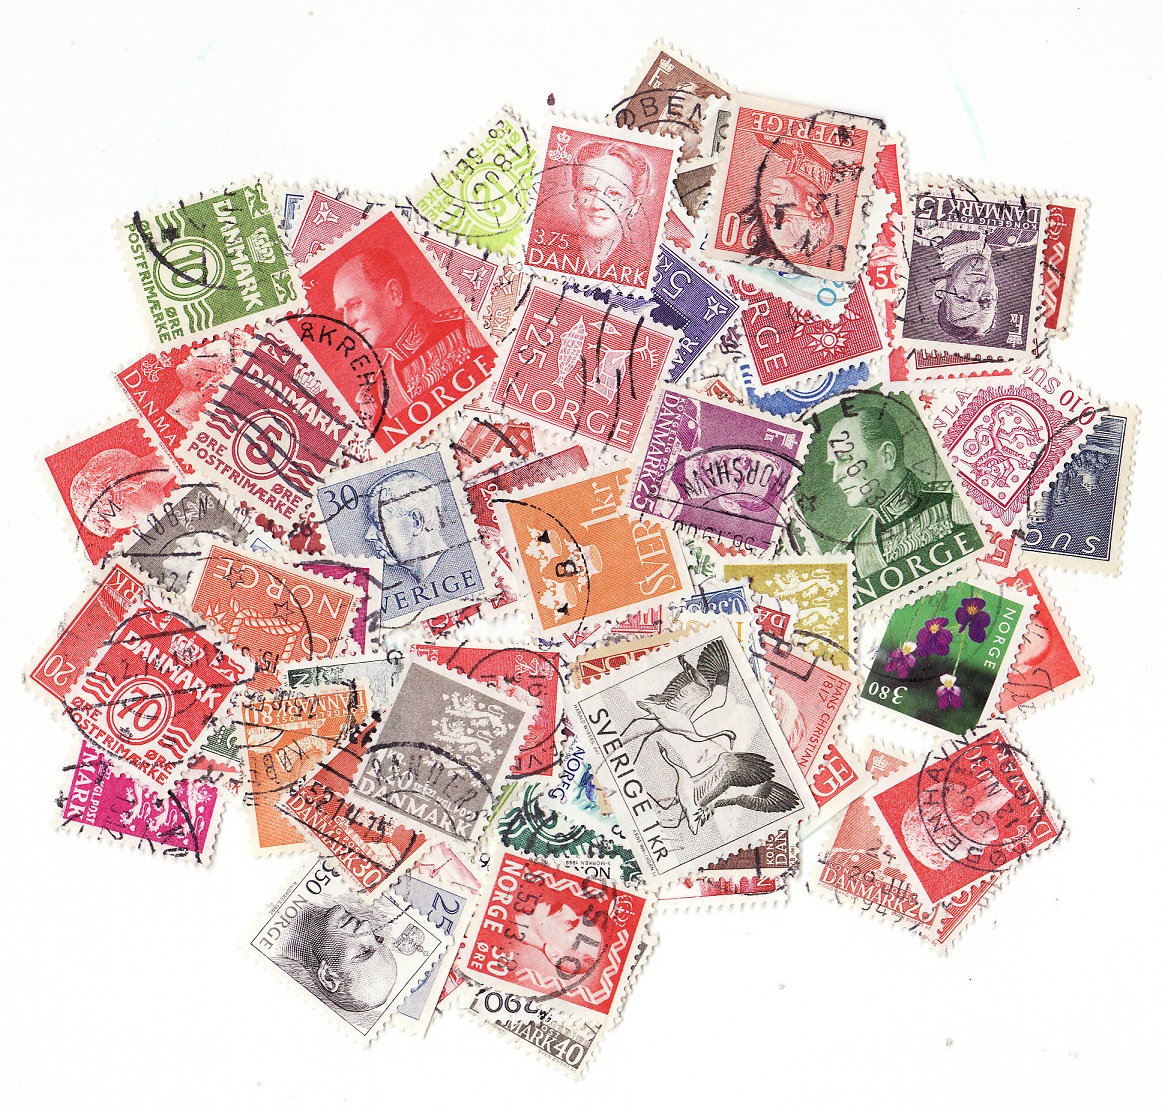 Scandinavia Stamp Packet, 100 different stamps from Scandinavia